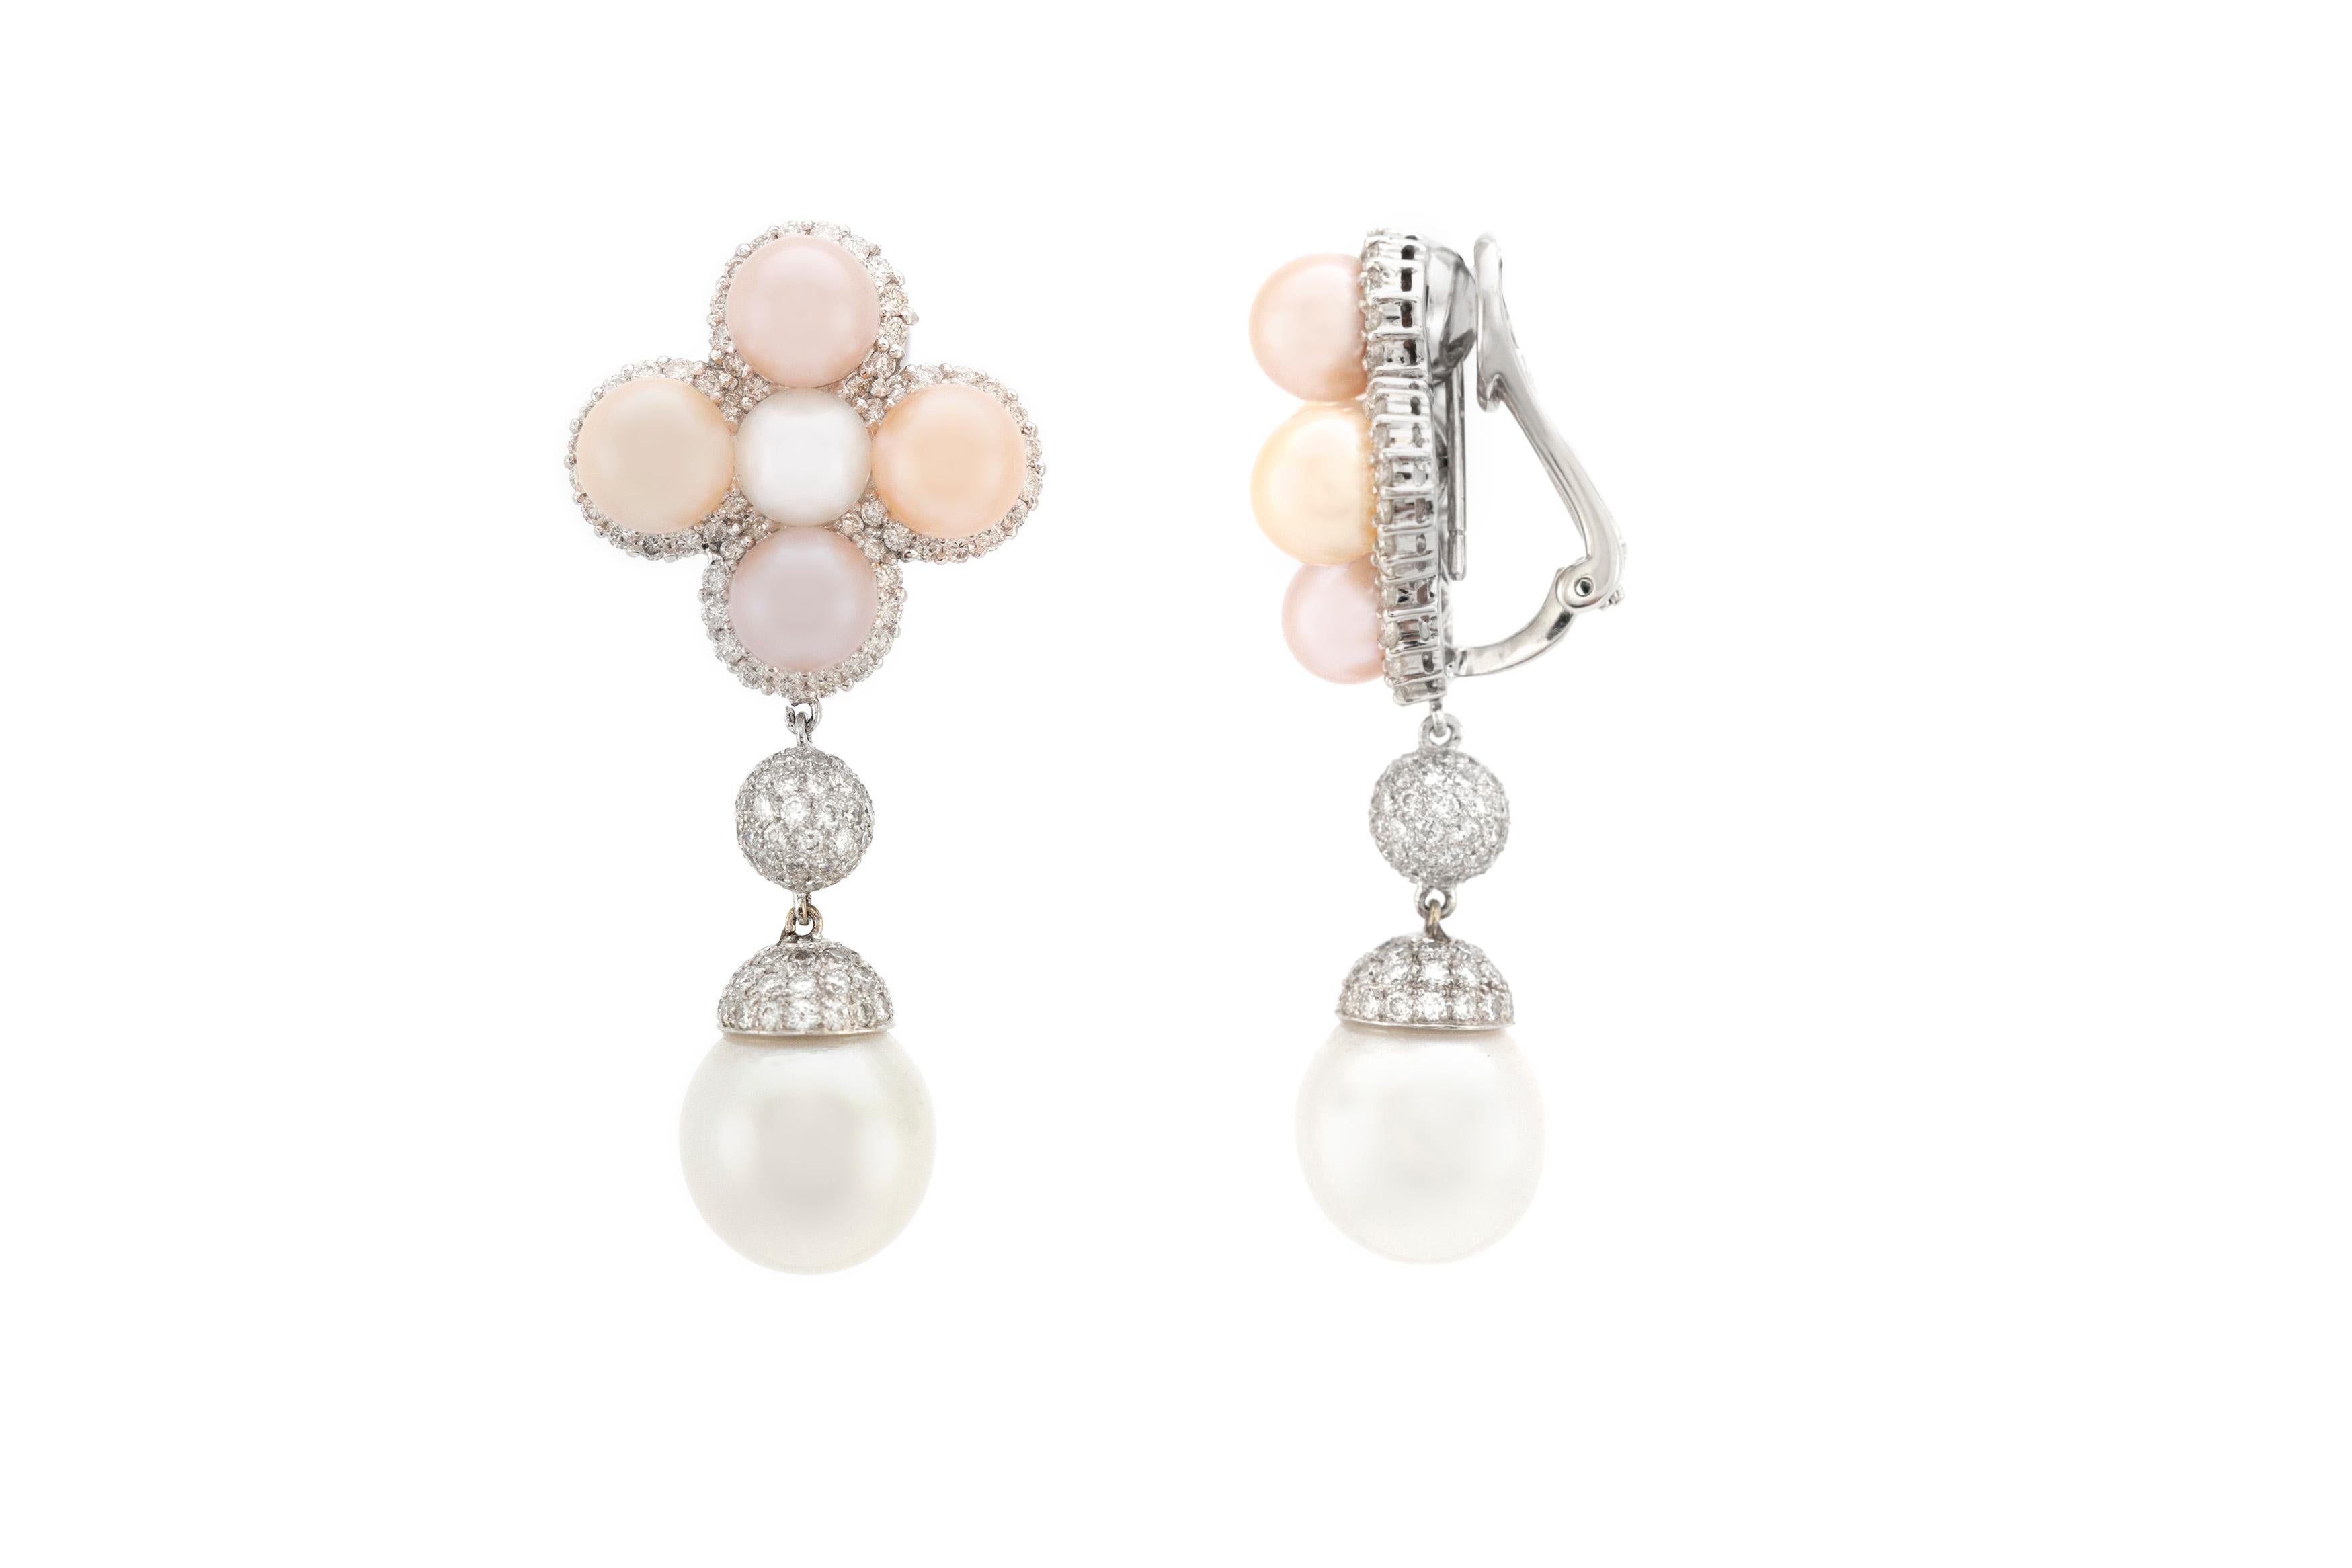 The earring is finely crafted in 18k white gold with pearls and diamonds weighing approximately total of 3.45 carat.